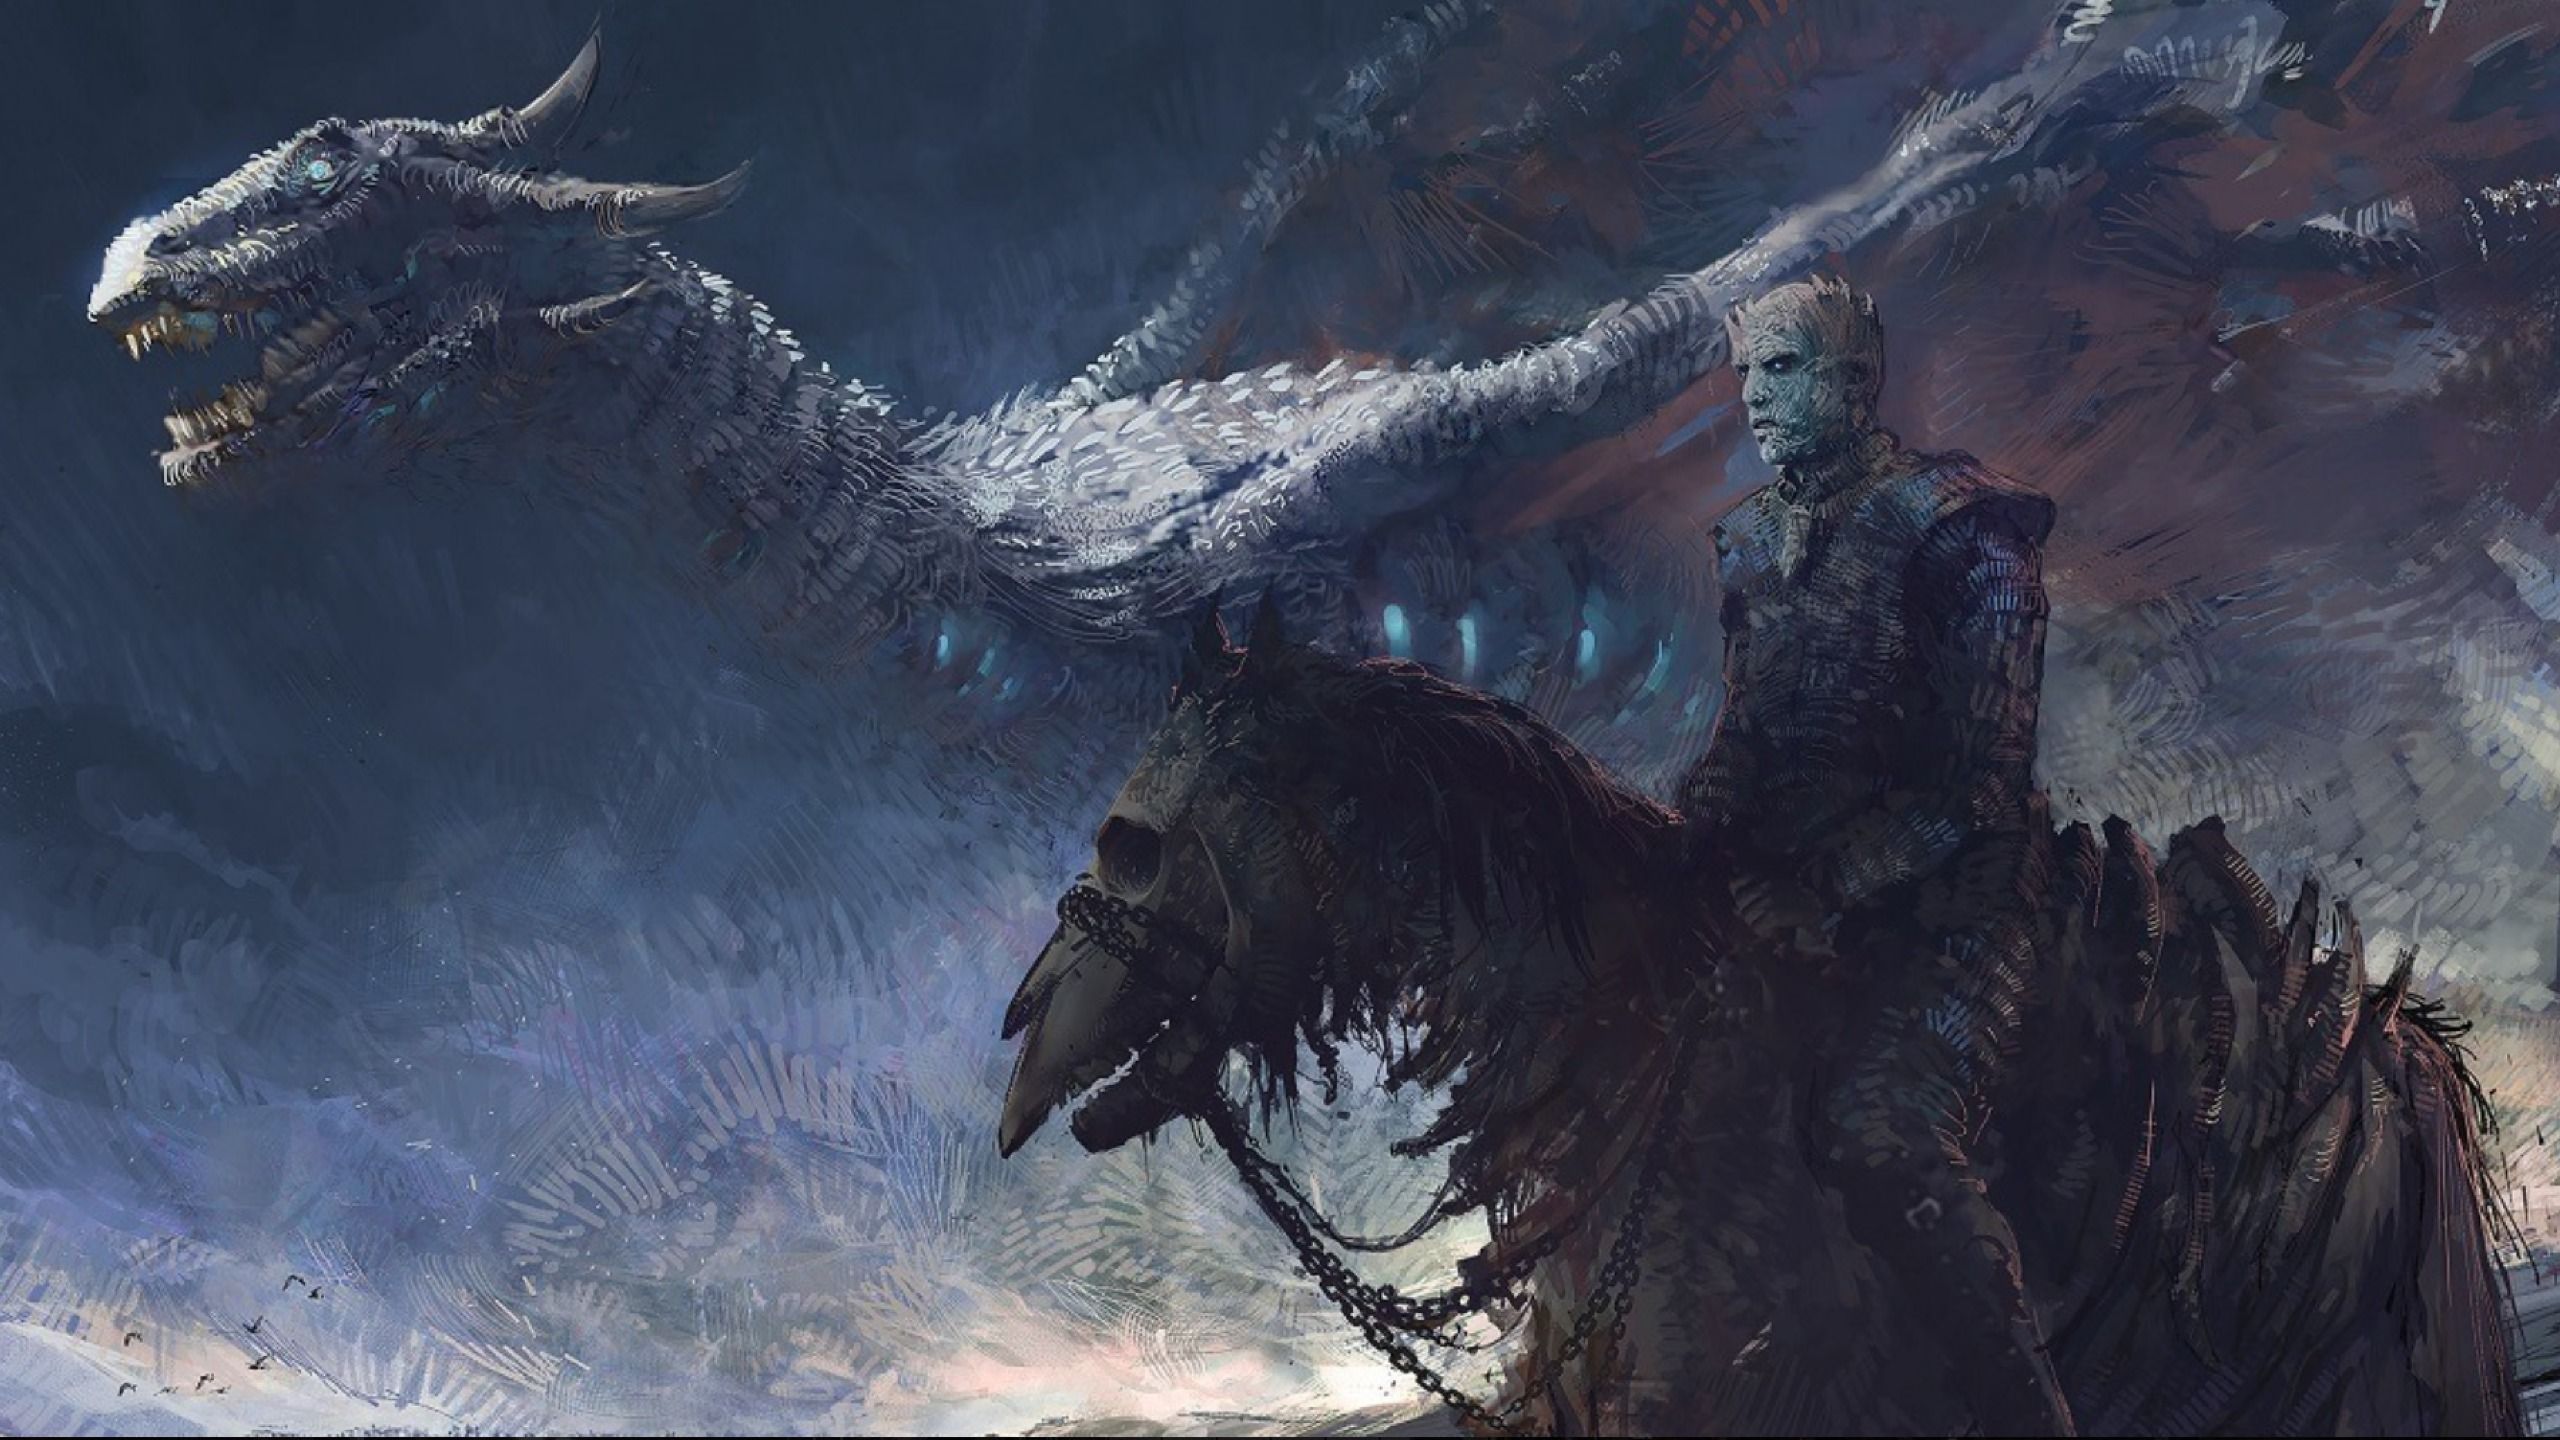 Game Of Thrones 7 White Walker And Ice Dragon Art 1440P Resolution Wallpaper, HD Artist 4K Wallpaper, Image, Photo and Background